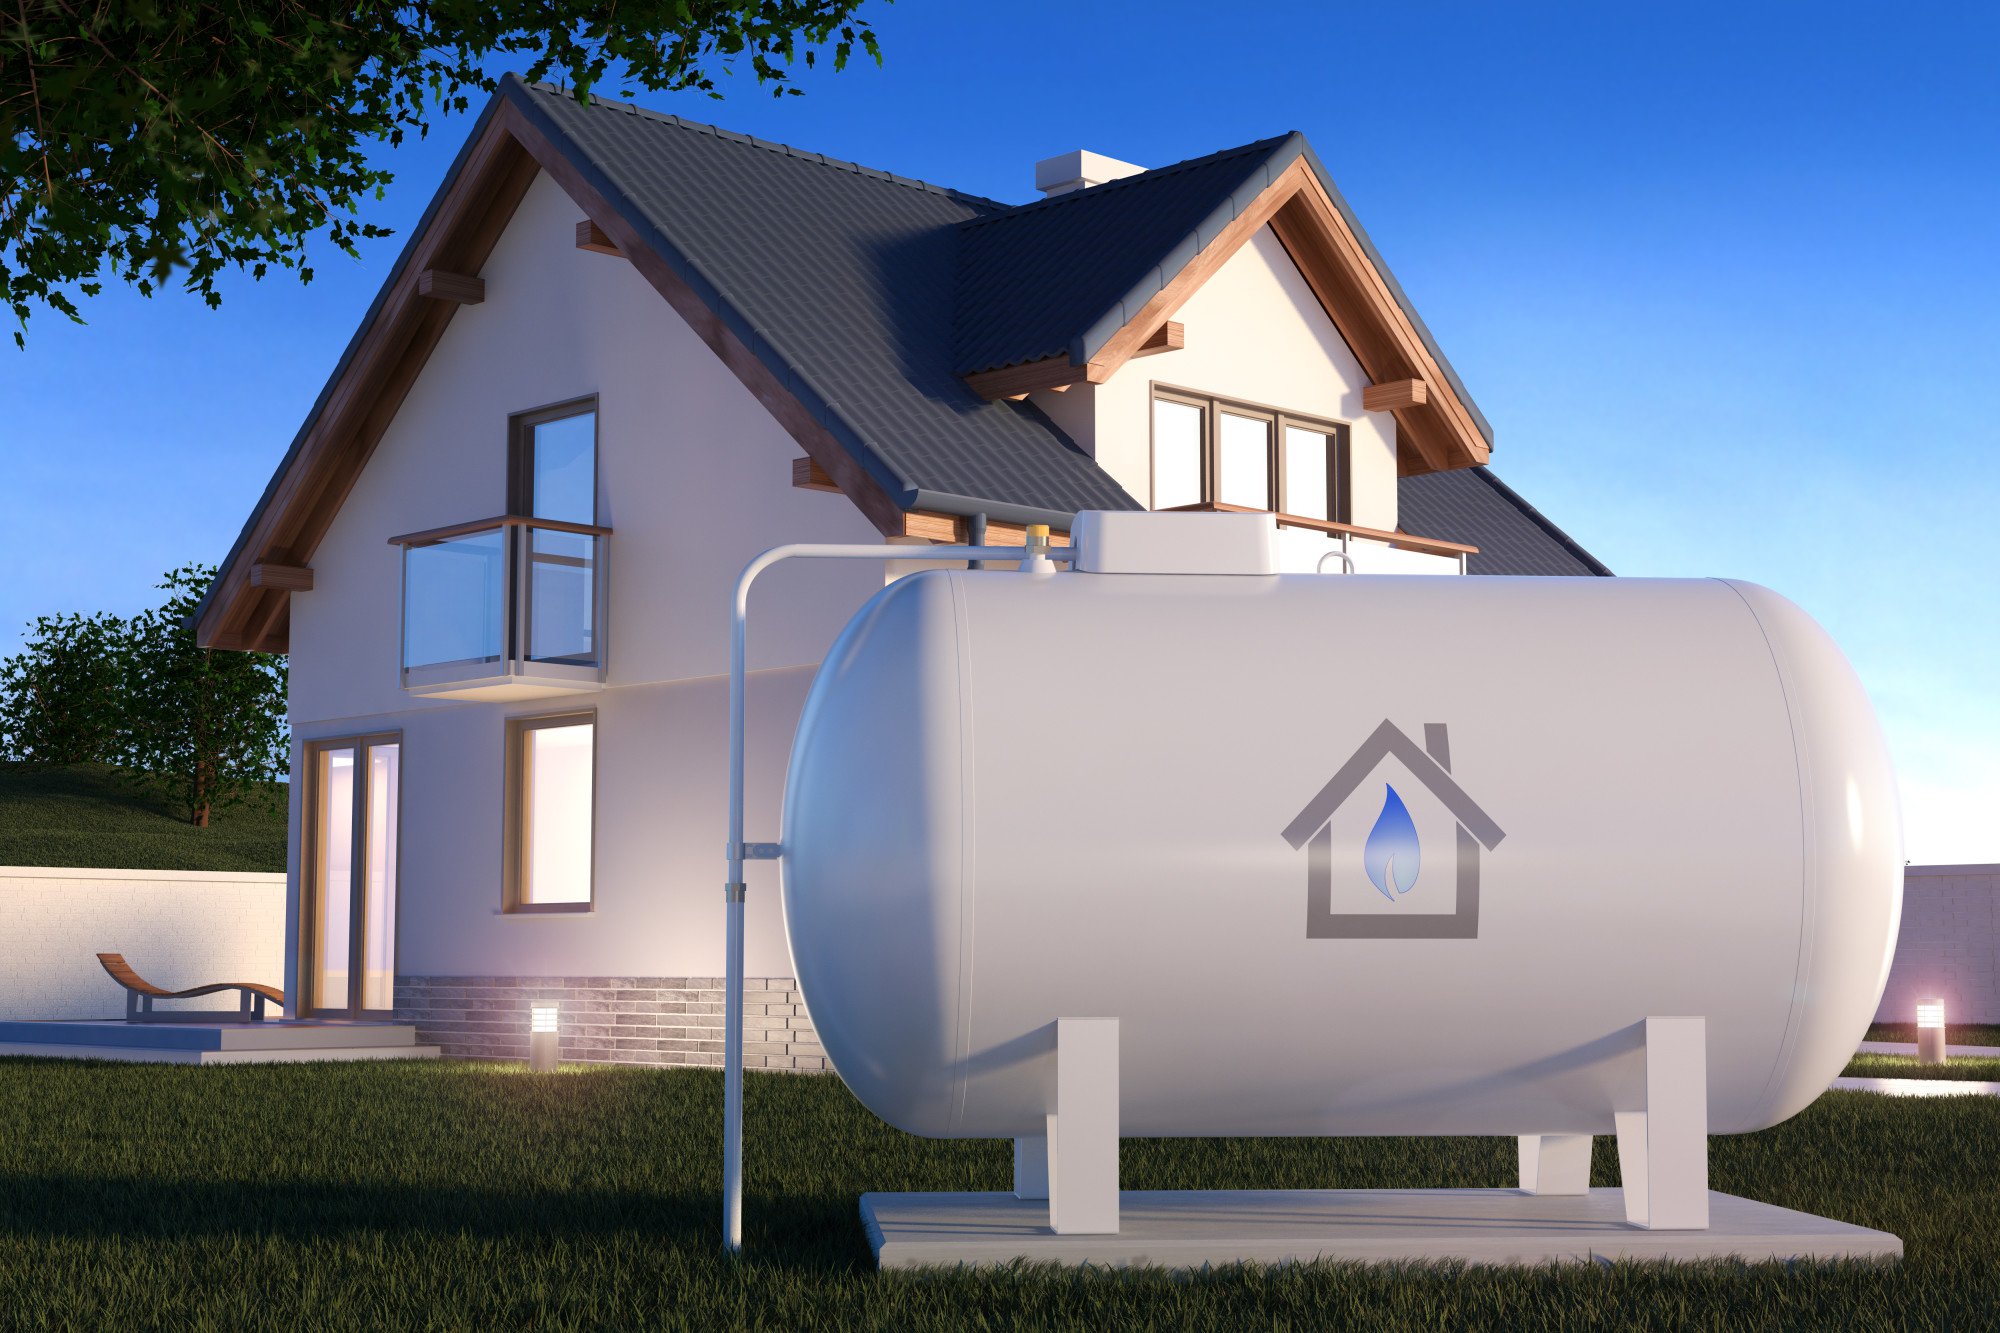 Pros & Cons of Owning a Propane Gas Tank.